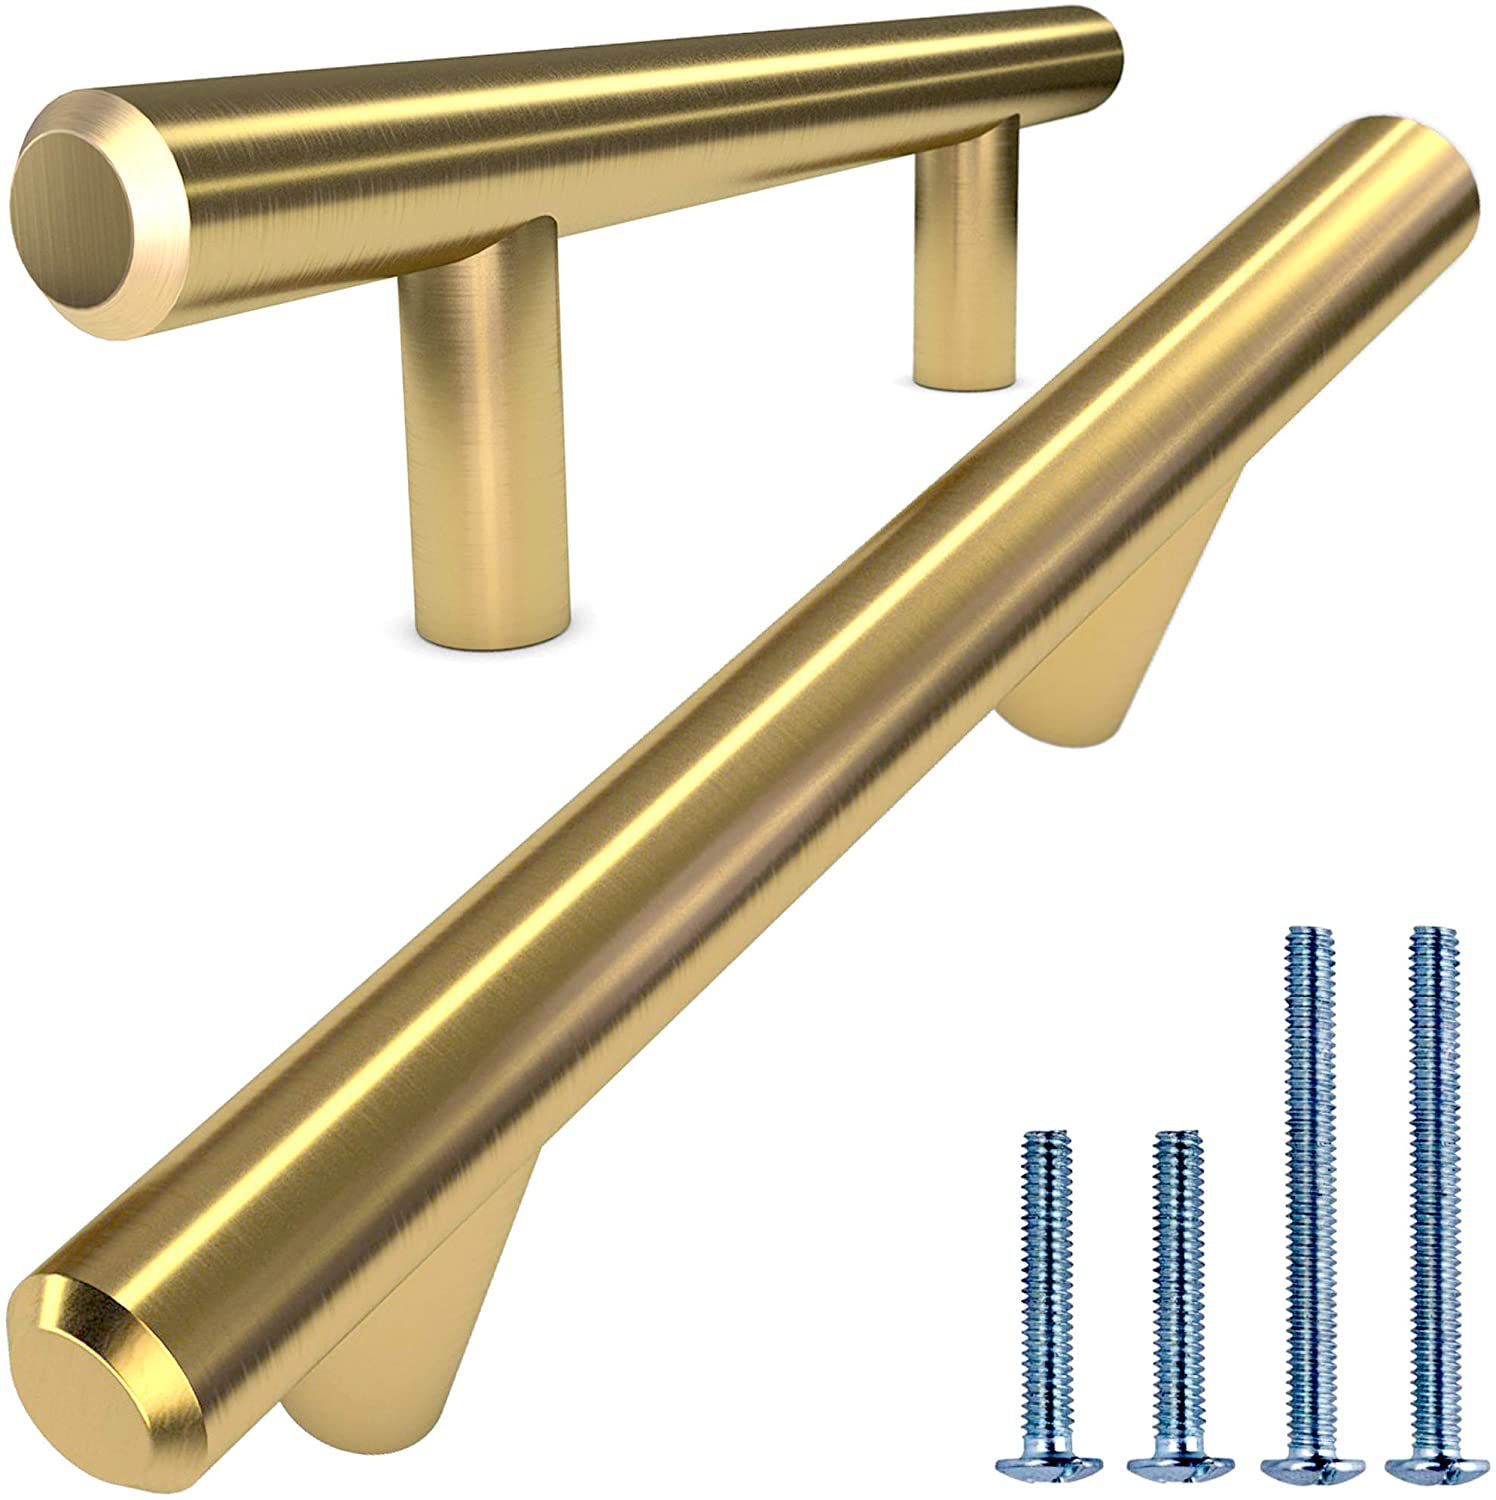 (10) 6" Brushed Satin Gold/Brass Finish Hollow Steel Bar Handle Knob Pull | Kitchen Cabinet